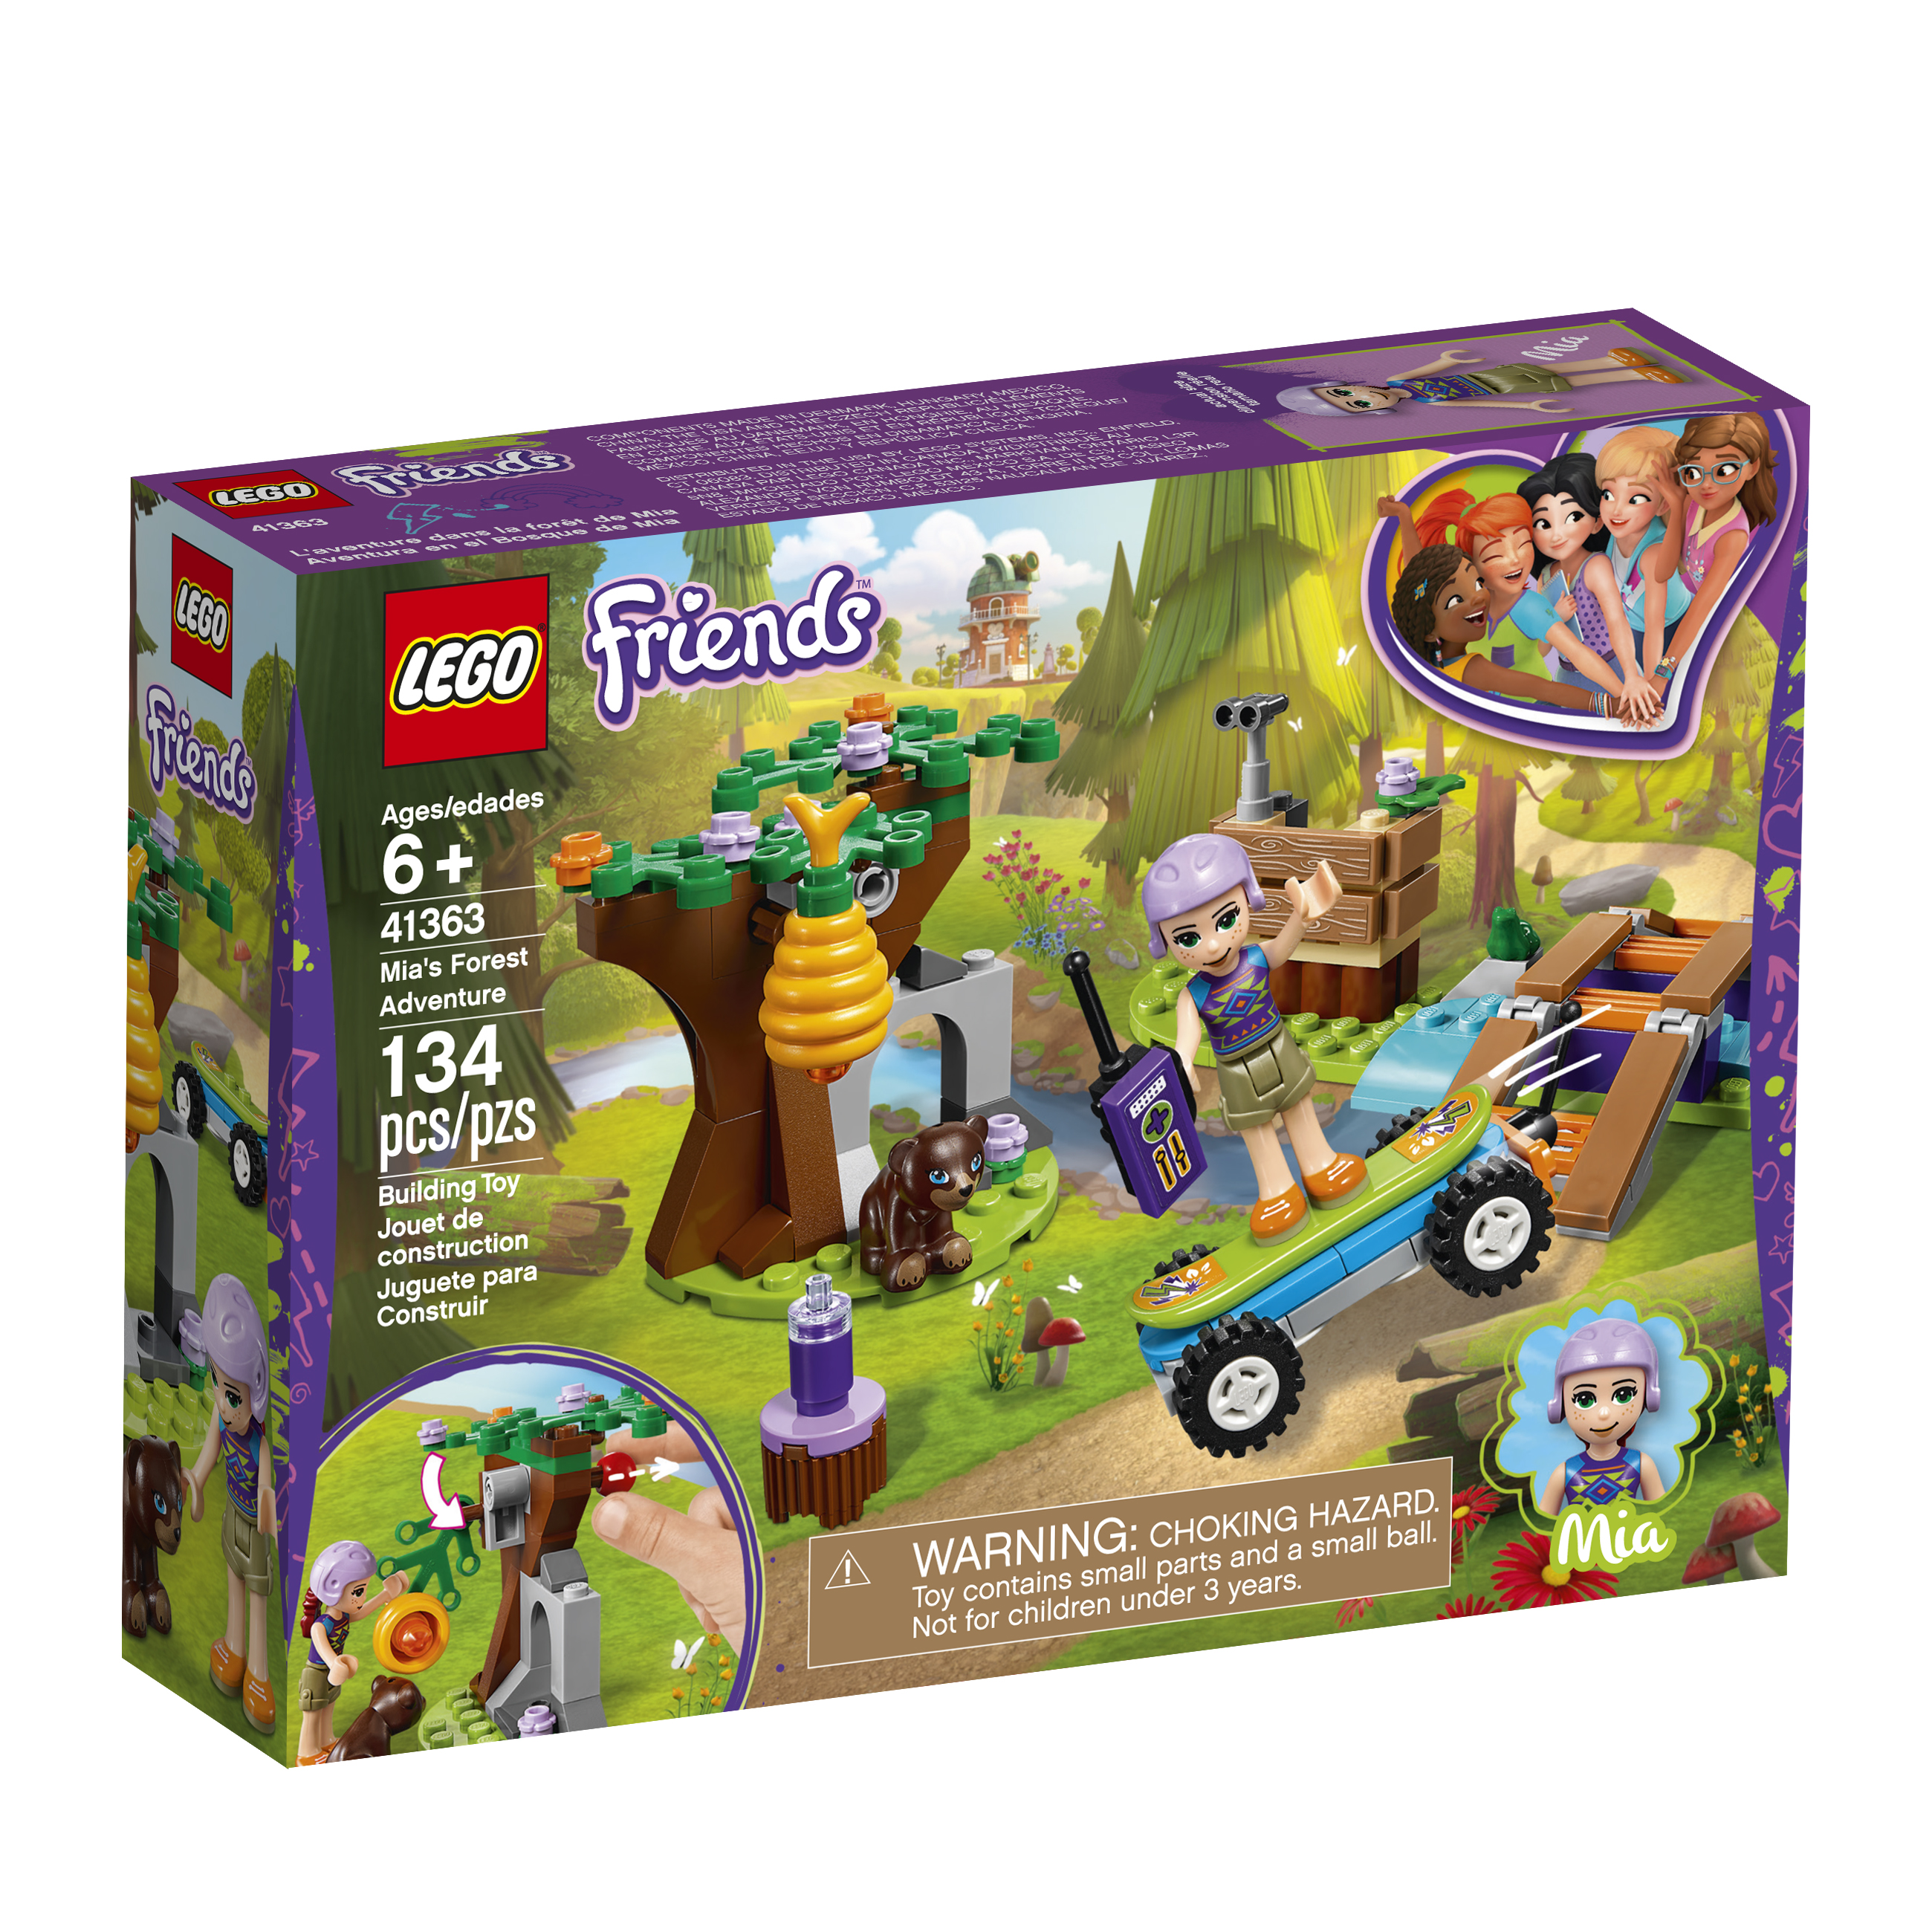 LEGO Friends Mia's Forest Adventure 41363 Building Set - image 5 of 8